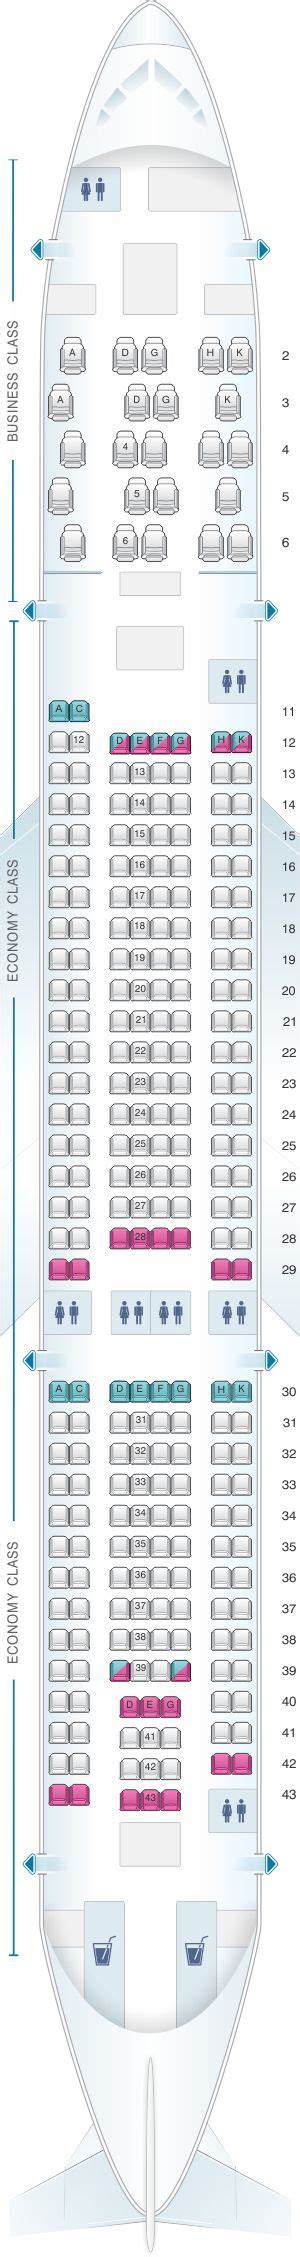 Seat Map Airbus A330 200 Aer Lingus Best Seats In Plane Images And